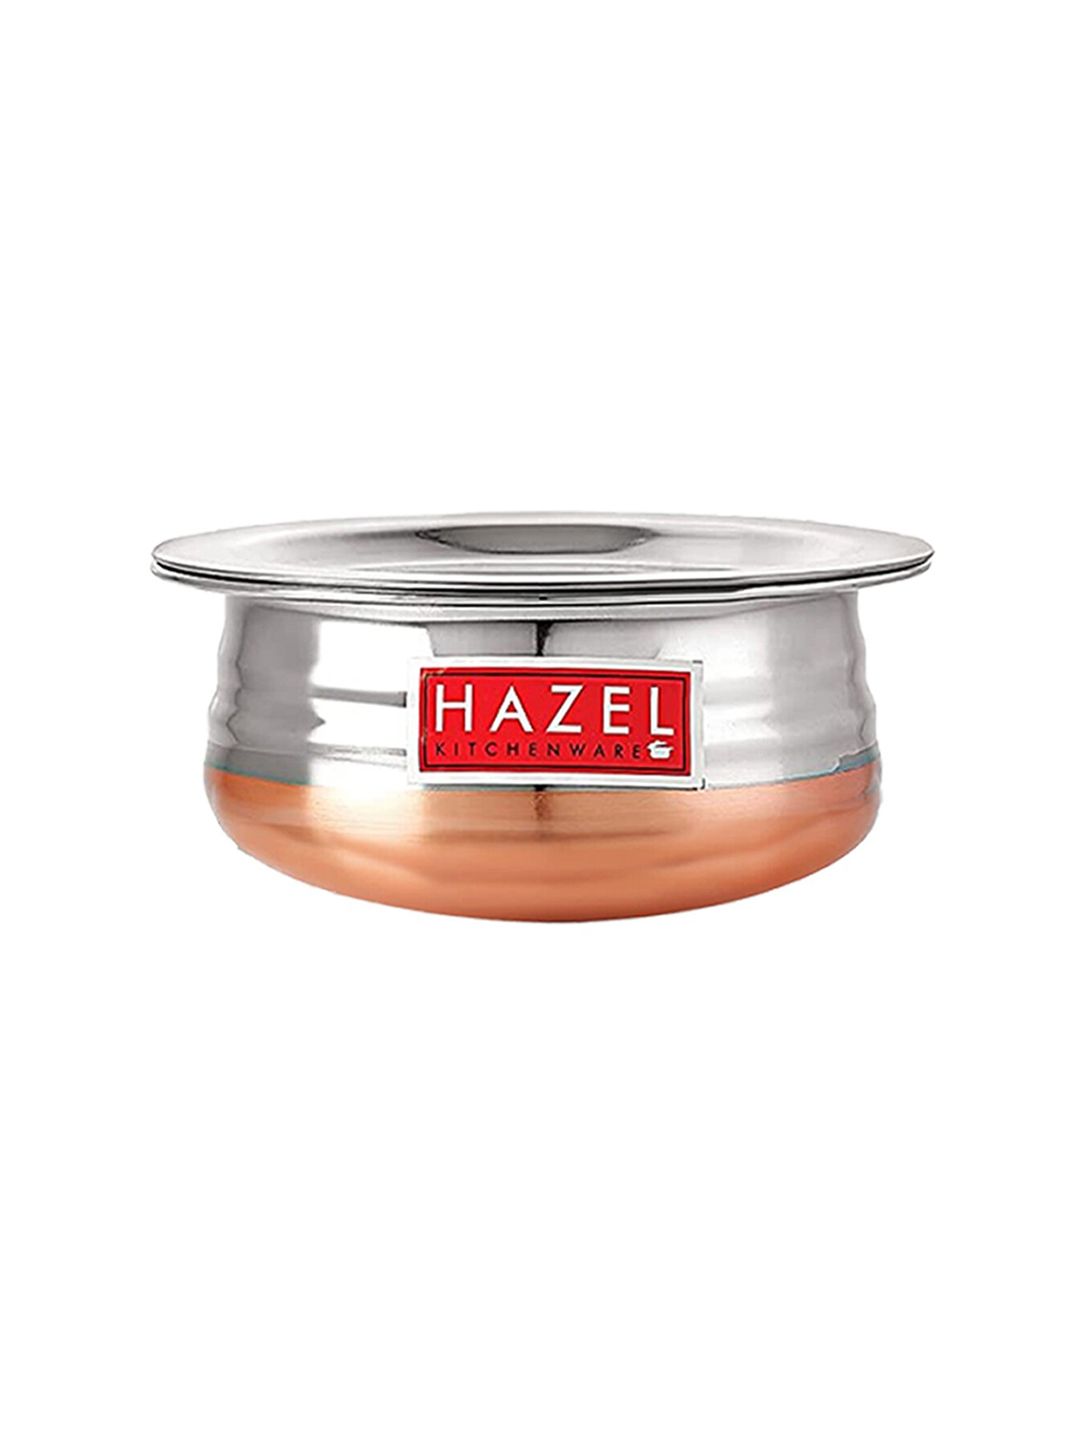 HAZEL Unisex Silver-Toned Stainless Steel Handi  Cookware Price in India